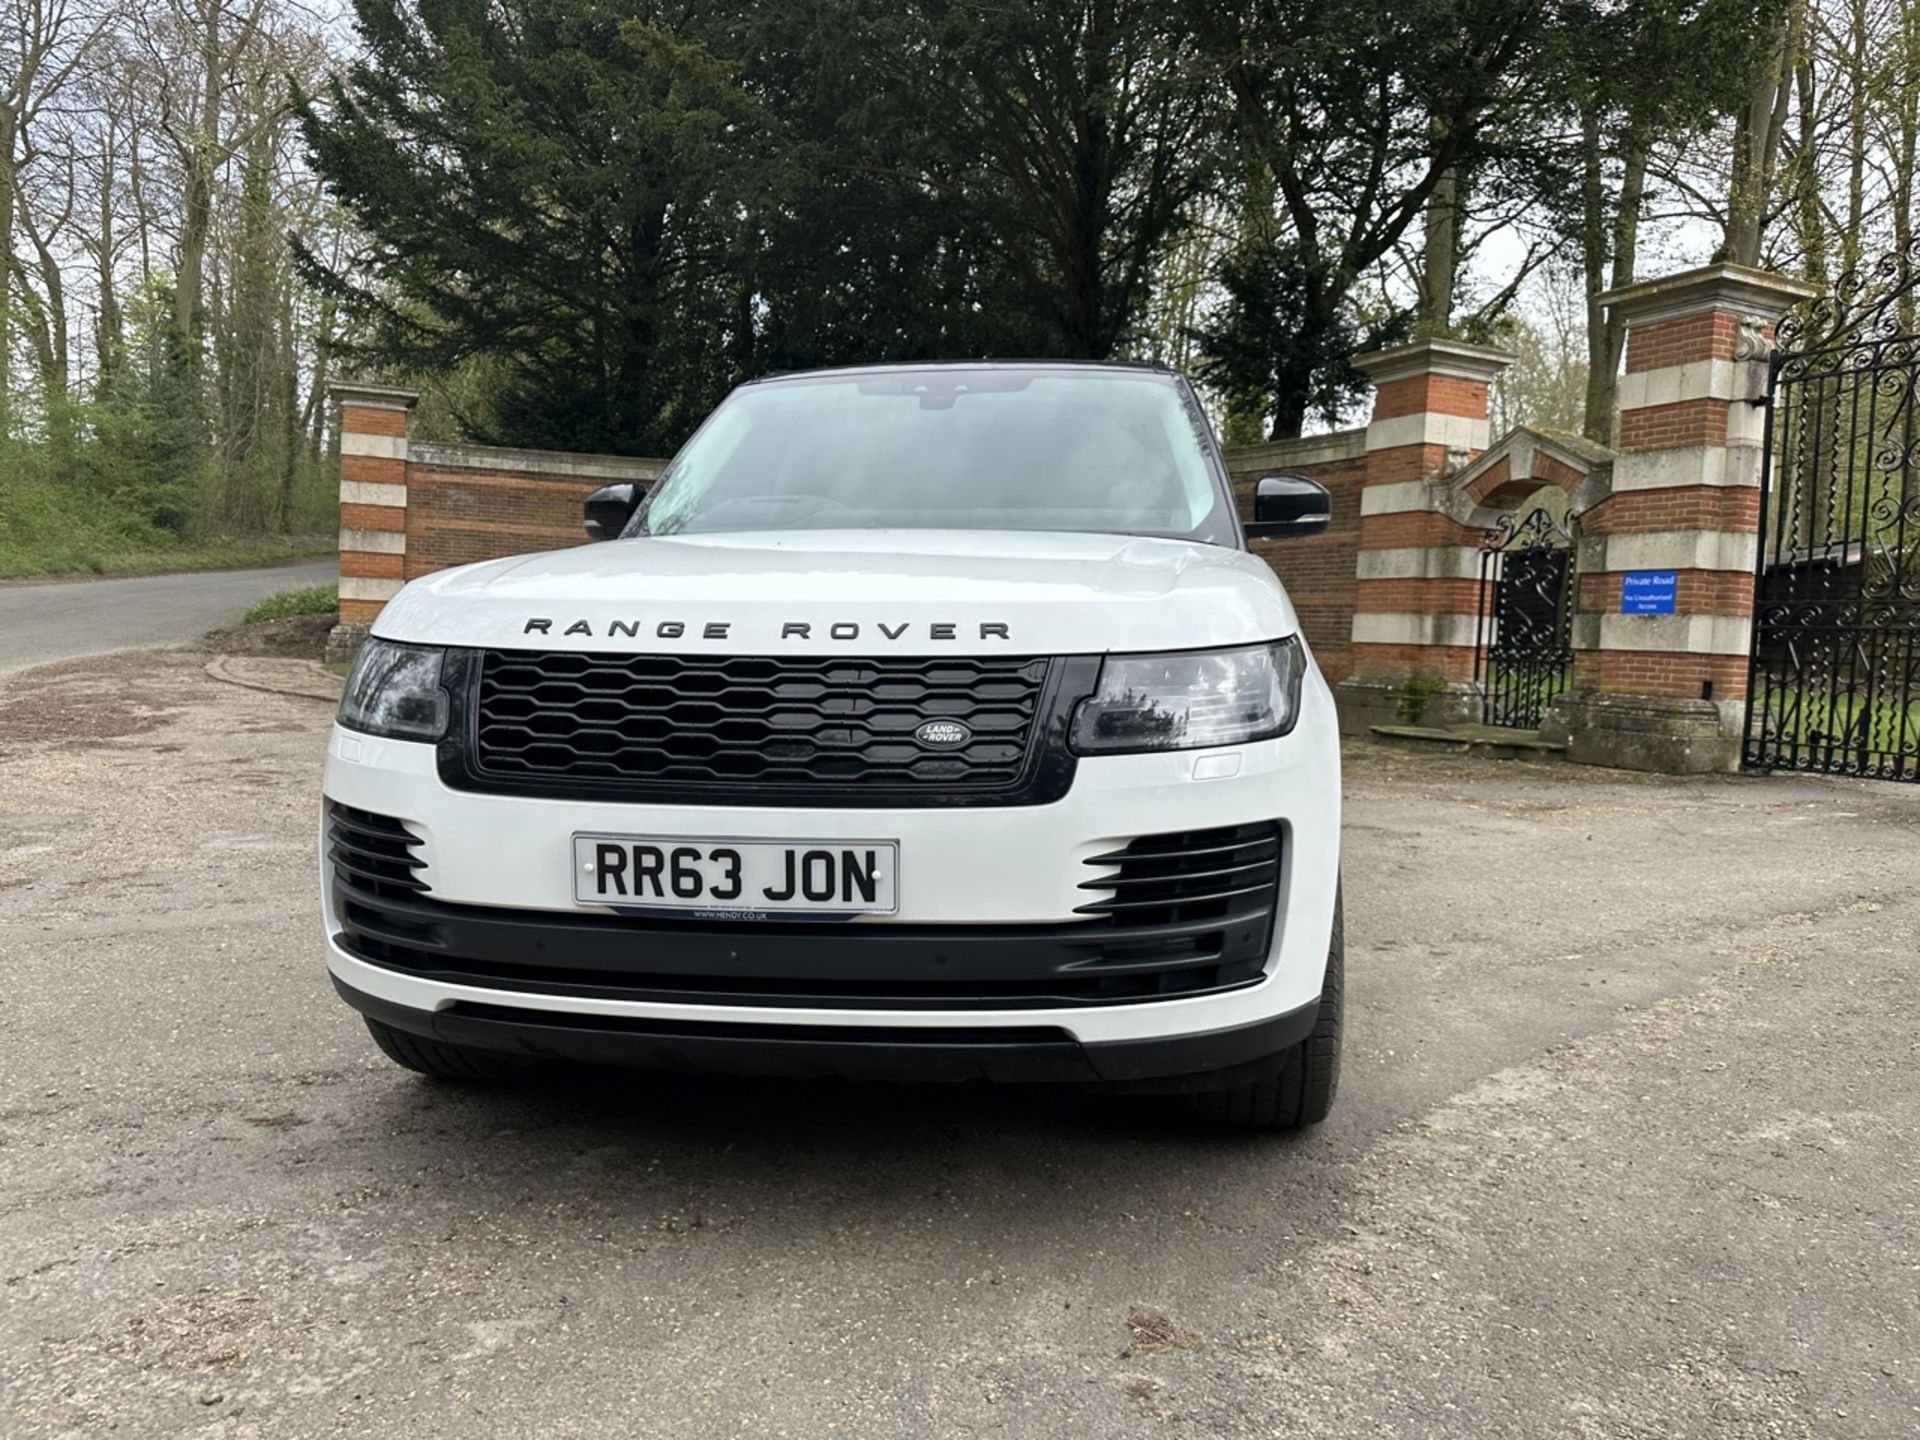 LAND ROVER RANGE ROVER 2.0 P400e Autobiography 4dr Auto - Automatic - 2018 - 31k miles - FULL SH - Image 3 of 32